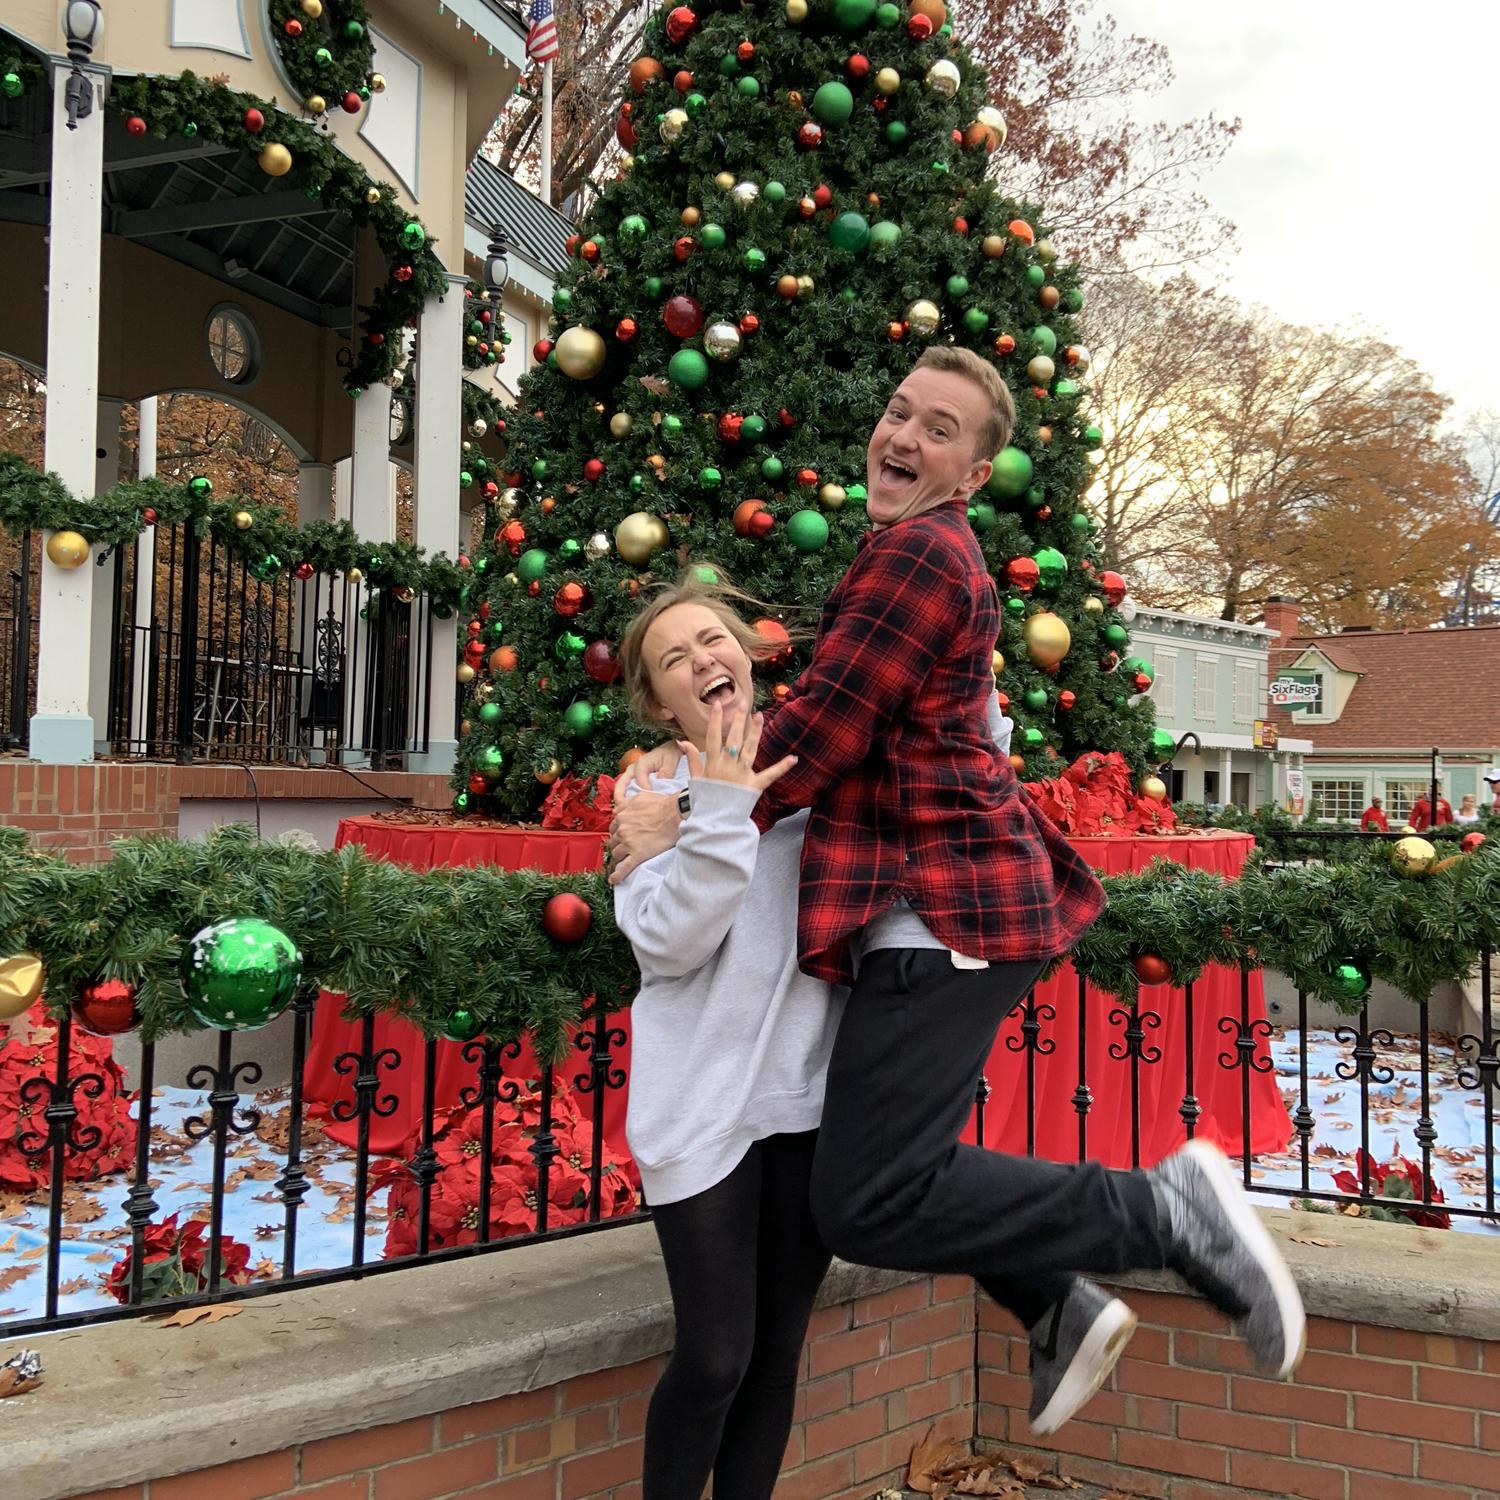 December 2019: Obviously, Connor was excited to ride his first big boy ride at Six Flags!